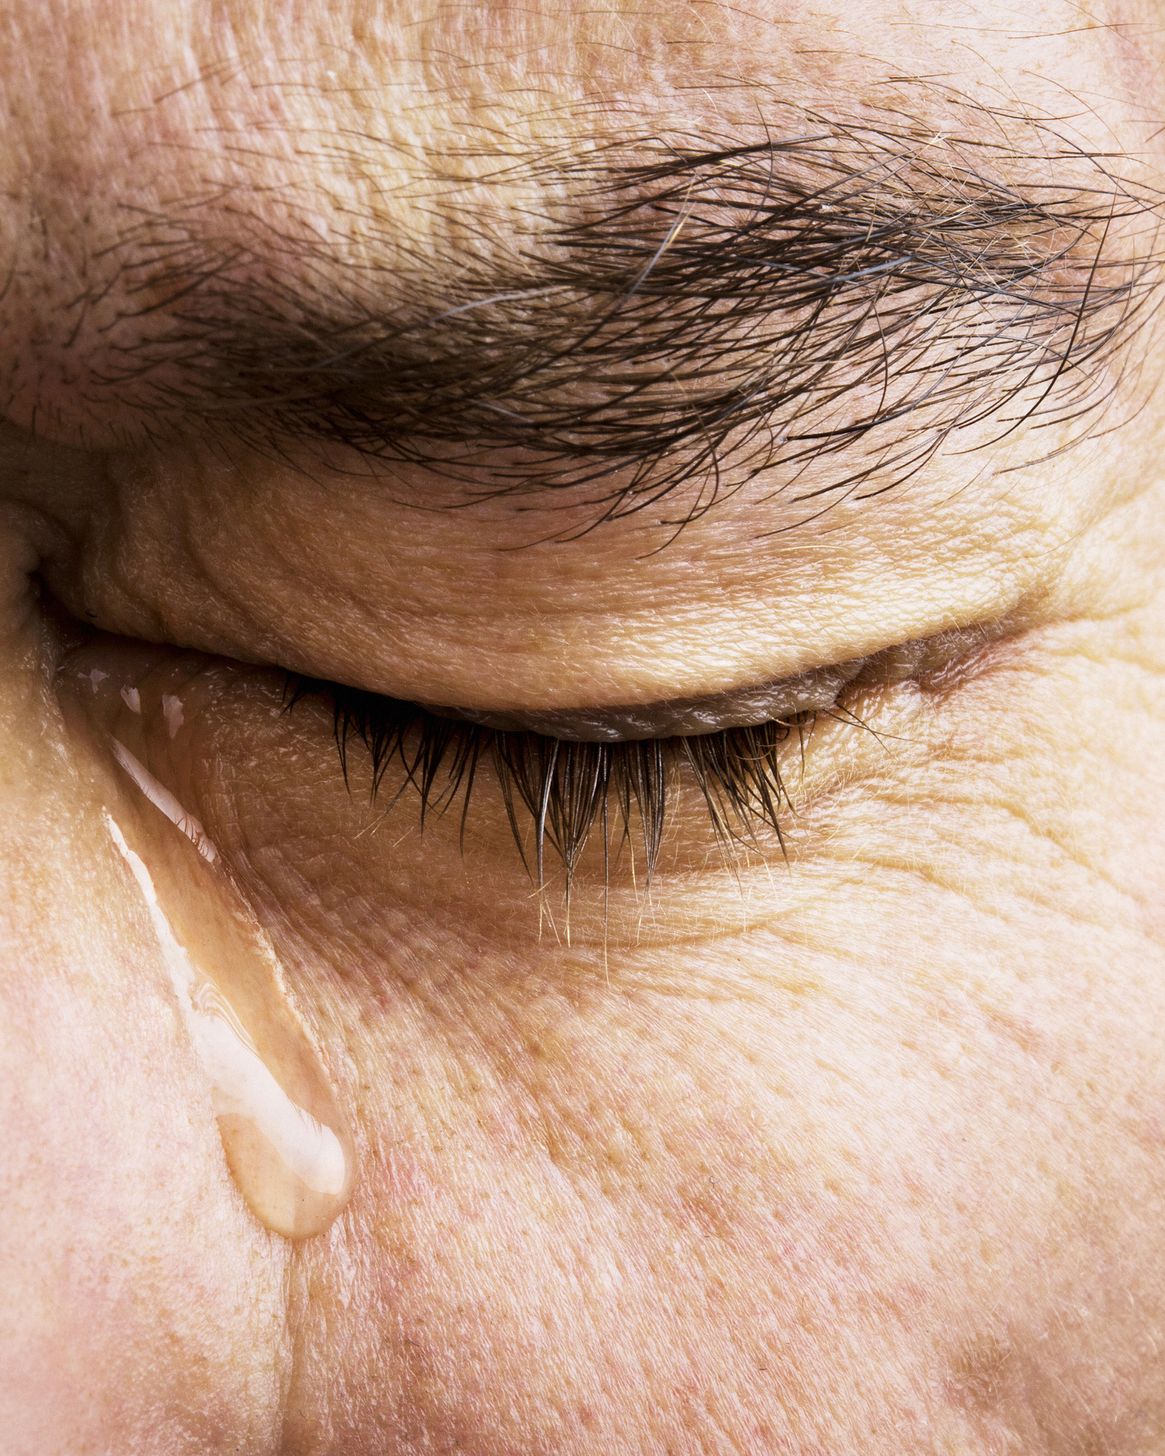 The Reason Crying Makes You Tired and Emotionally Drained